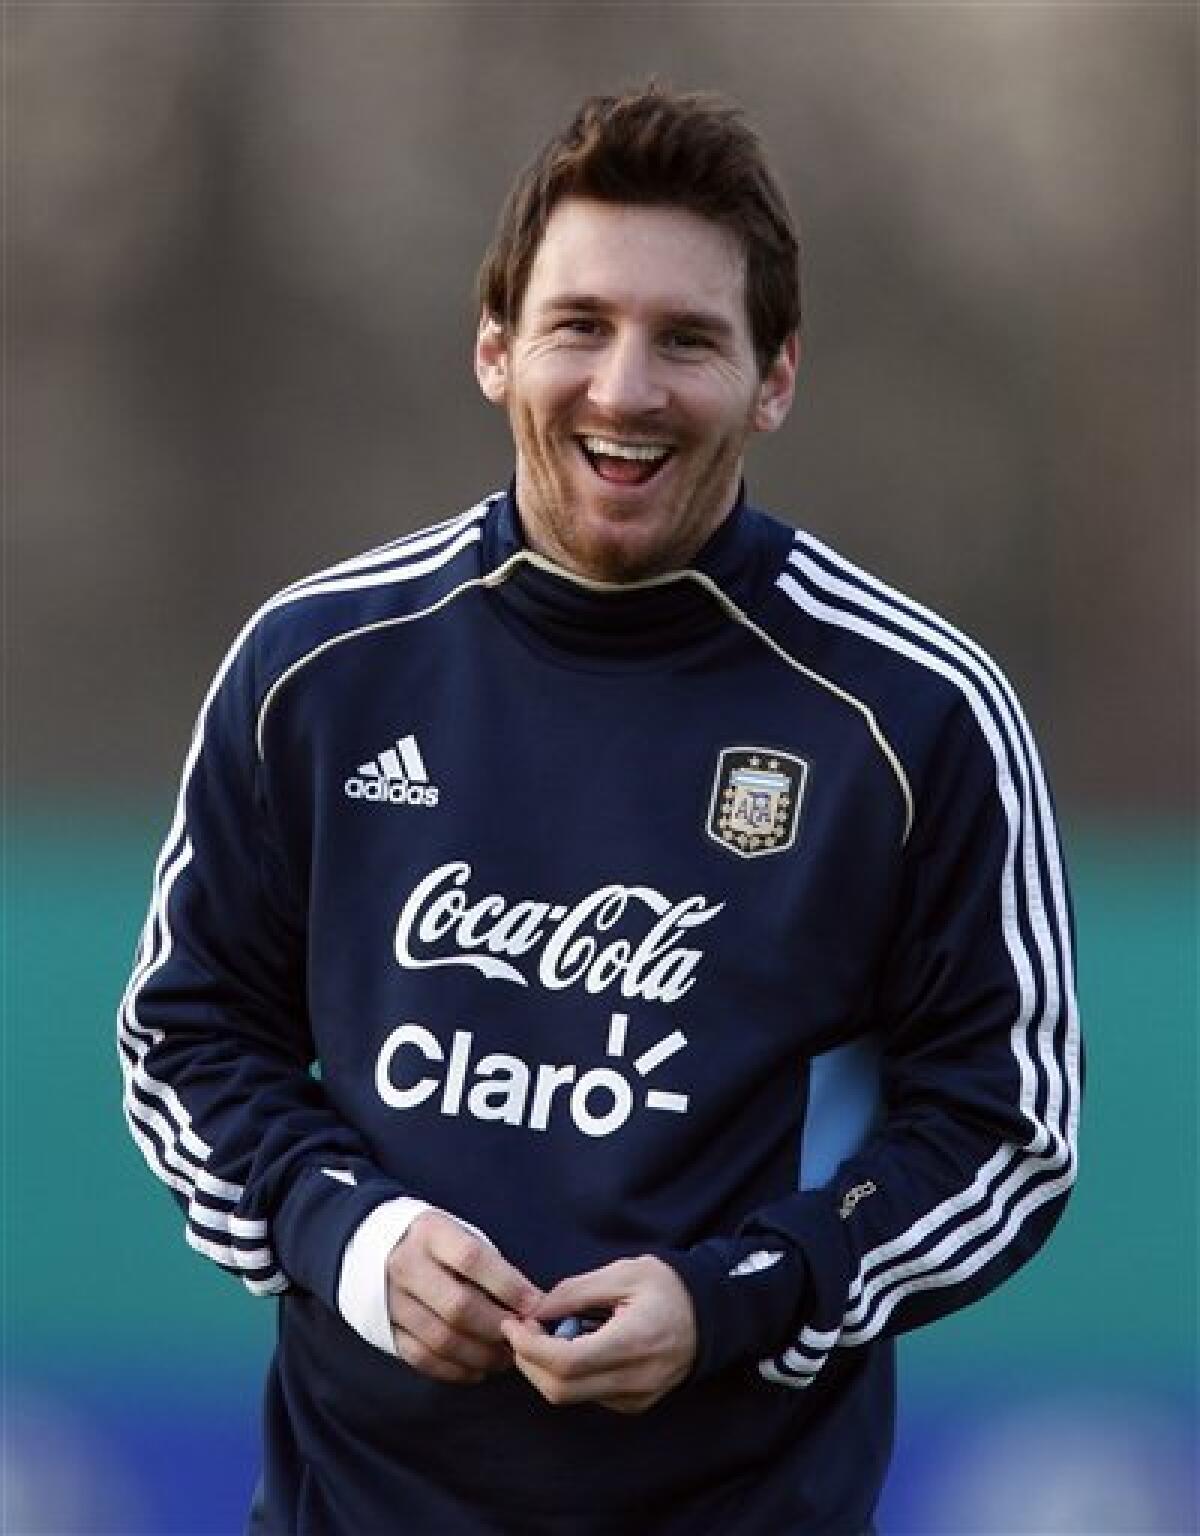 Argentina's Lionel Messi smiles at the end of a training session ahead of the upcoming 2011 Copa America in Buenos Aires, Argentina, Wednesday, June 29, 2011. Argentina will host the Copa America soccer tournament July 1-24. (AP Photo/Natacha Pisarenko)